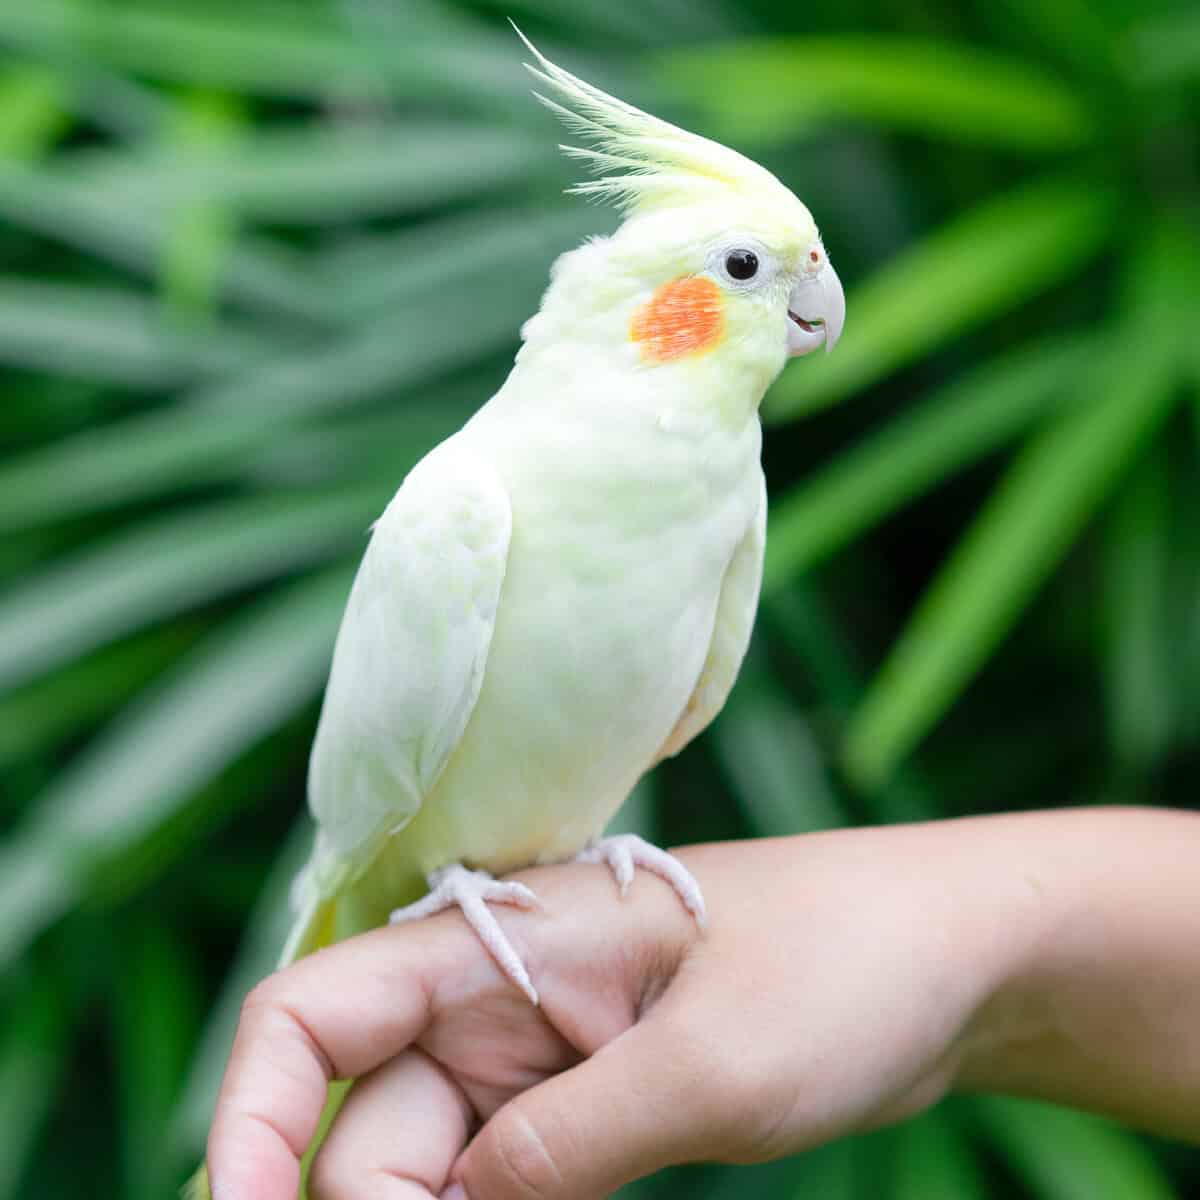 The Cockatiel is the Smallest, Actually a Miniature Cockatoo